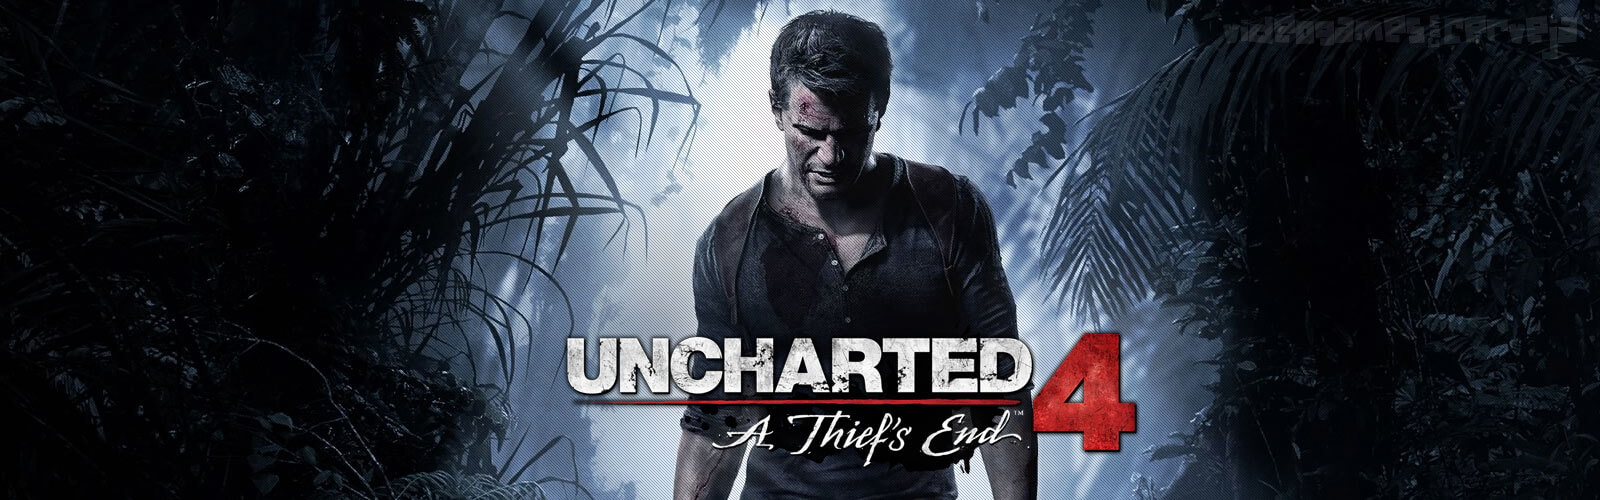 Análise - Uncharted 4: A Thief's End (PS4) Cover